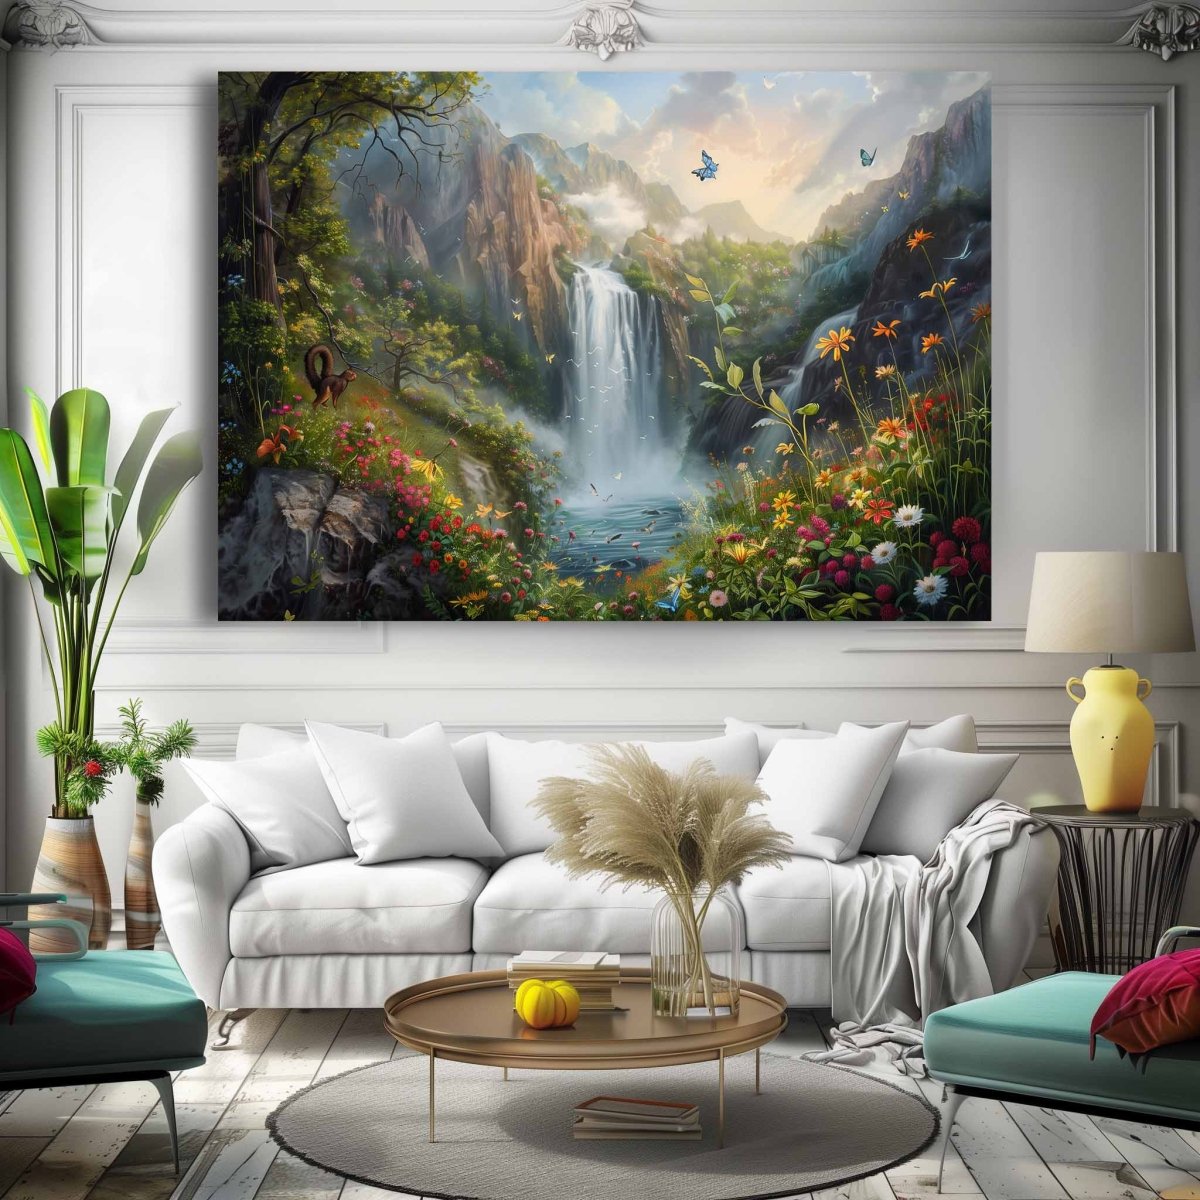 The Whispering Waterfall Canvas Wall Paining (36 x 24 Inches)